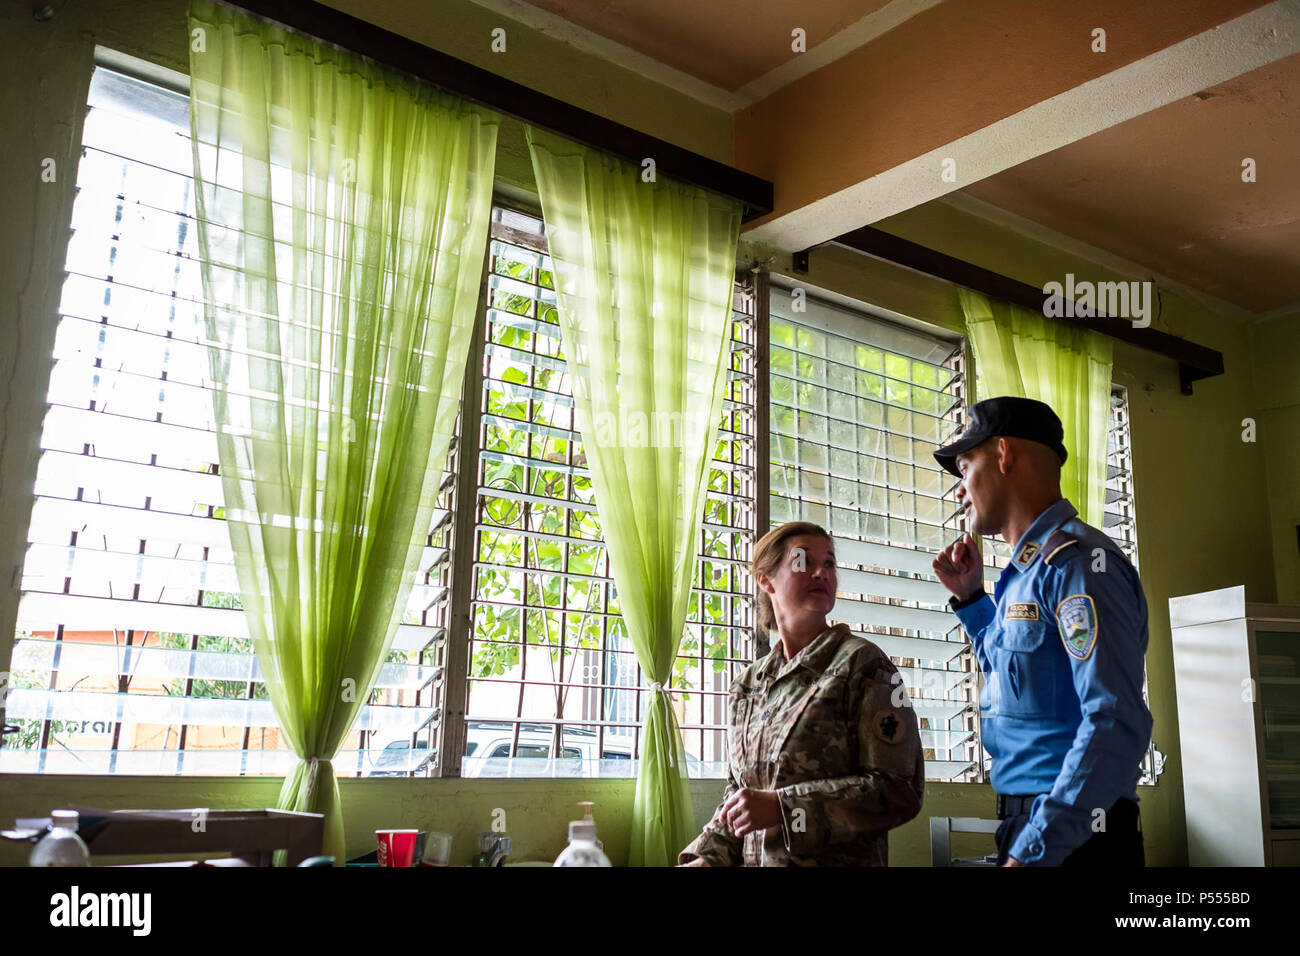 U.S. Army Lt. Col. Rhonda Dyer, Joint Task Force – Bravo Medical Element, speaks with a Honduran Police National about the Community Health Nurse mission in Comayagua, Honduras, May 10, 2017. The CHM is a weekly partnership with the staff at Jose Ochoa Public Health Clinic, administering vaccines, Vitamins, deworming medication and other medical supplies to over 180 Hondurans around the Comayagua area on May 10, 2017. Stock Photo